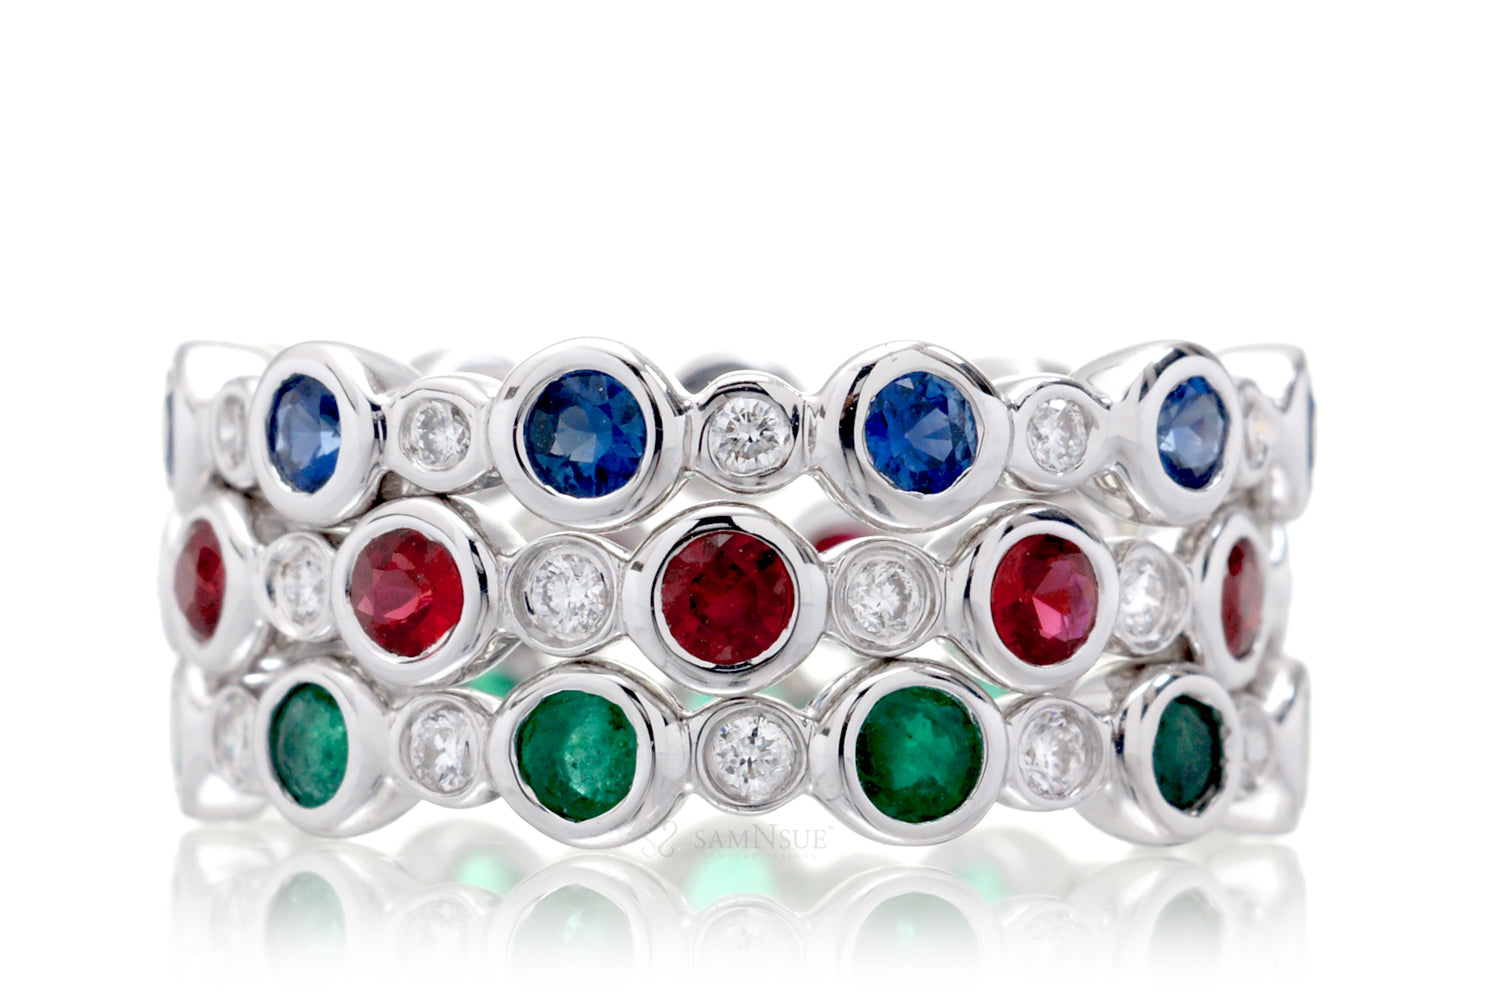 The Lucinda Round Eternity Bands